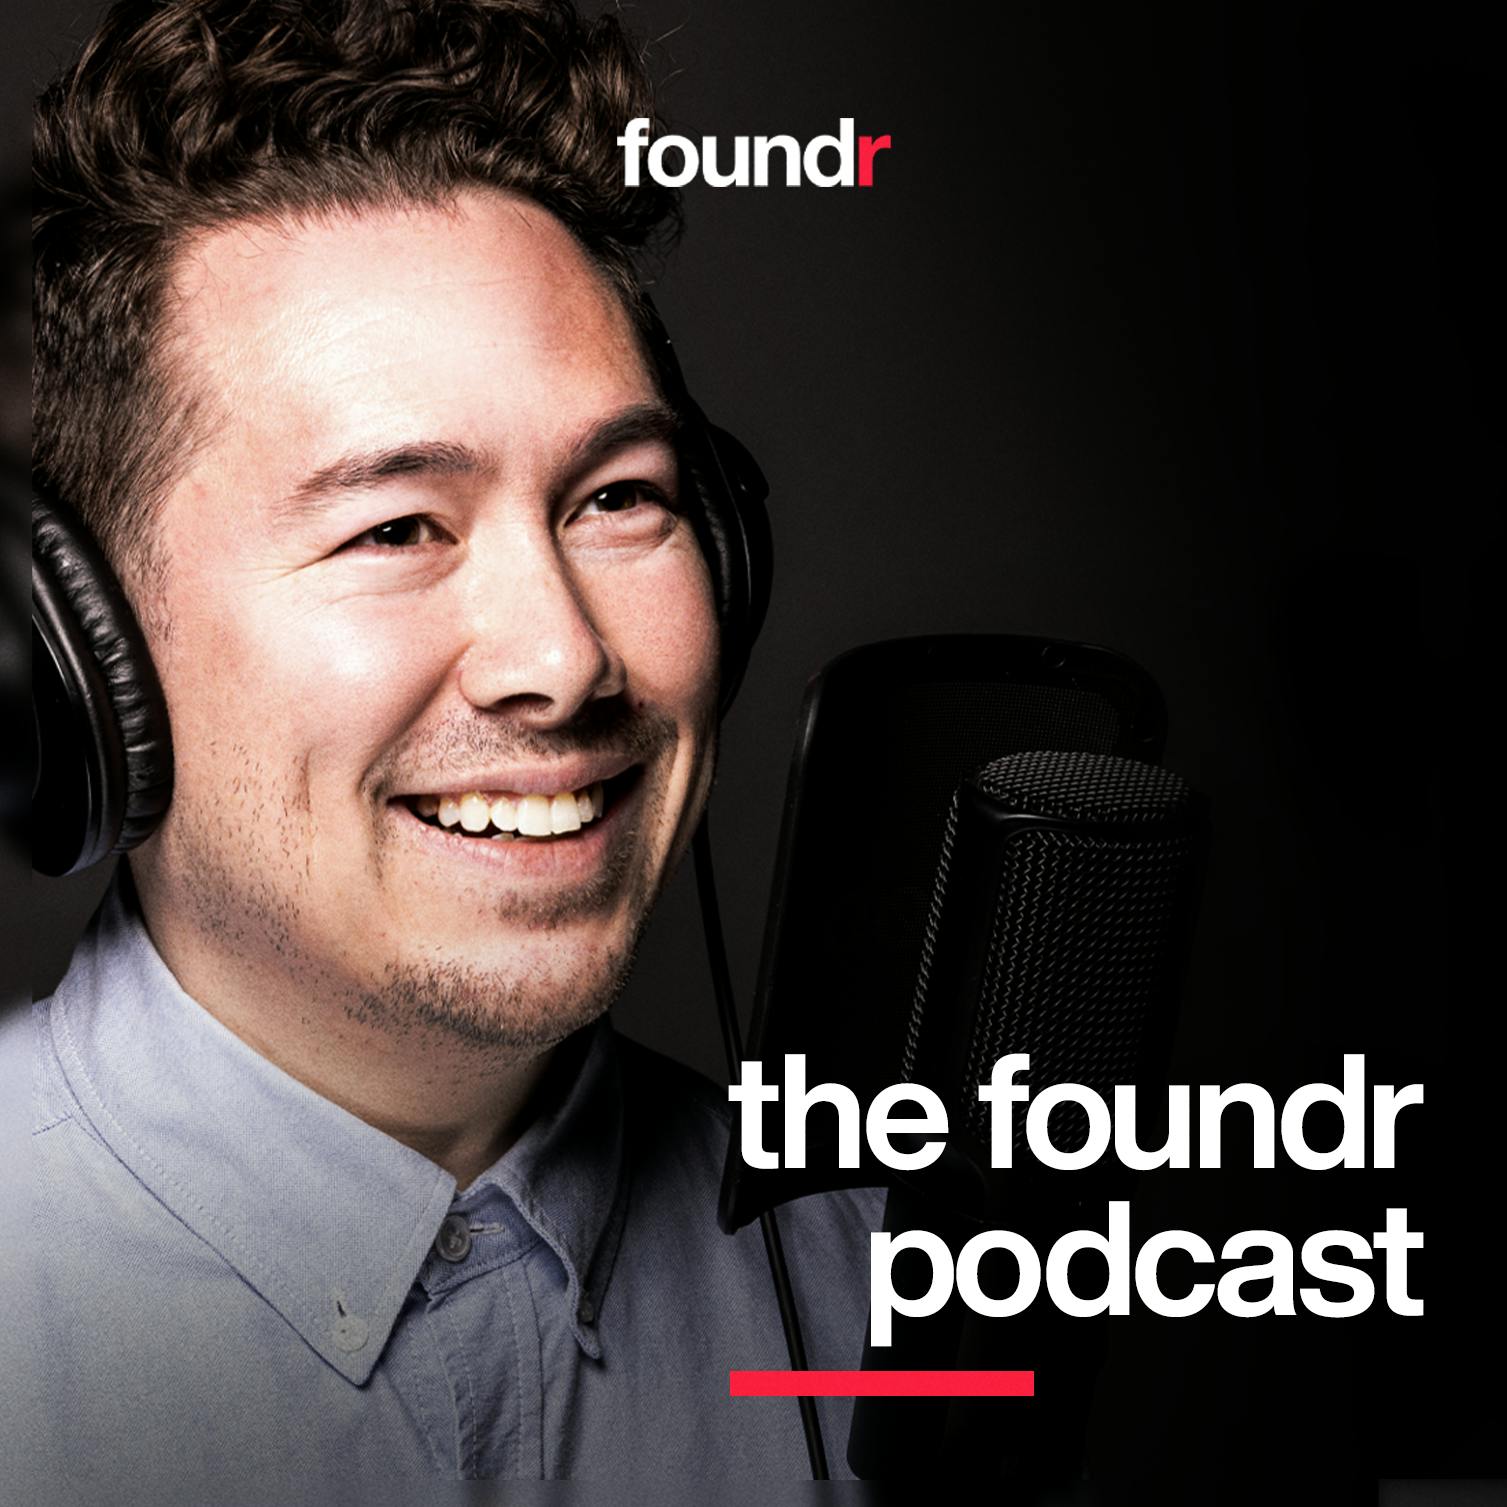 189: Foundr Community Member Shifts His Business Into High Gear With Help From Mentors [Foundr’s 5th Birthday Special Episode]